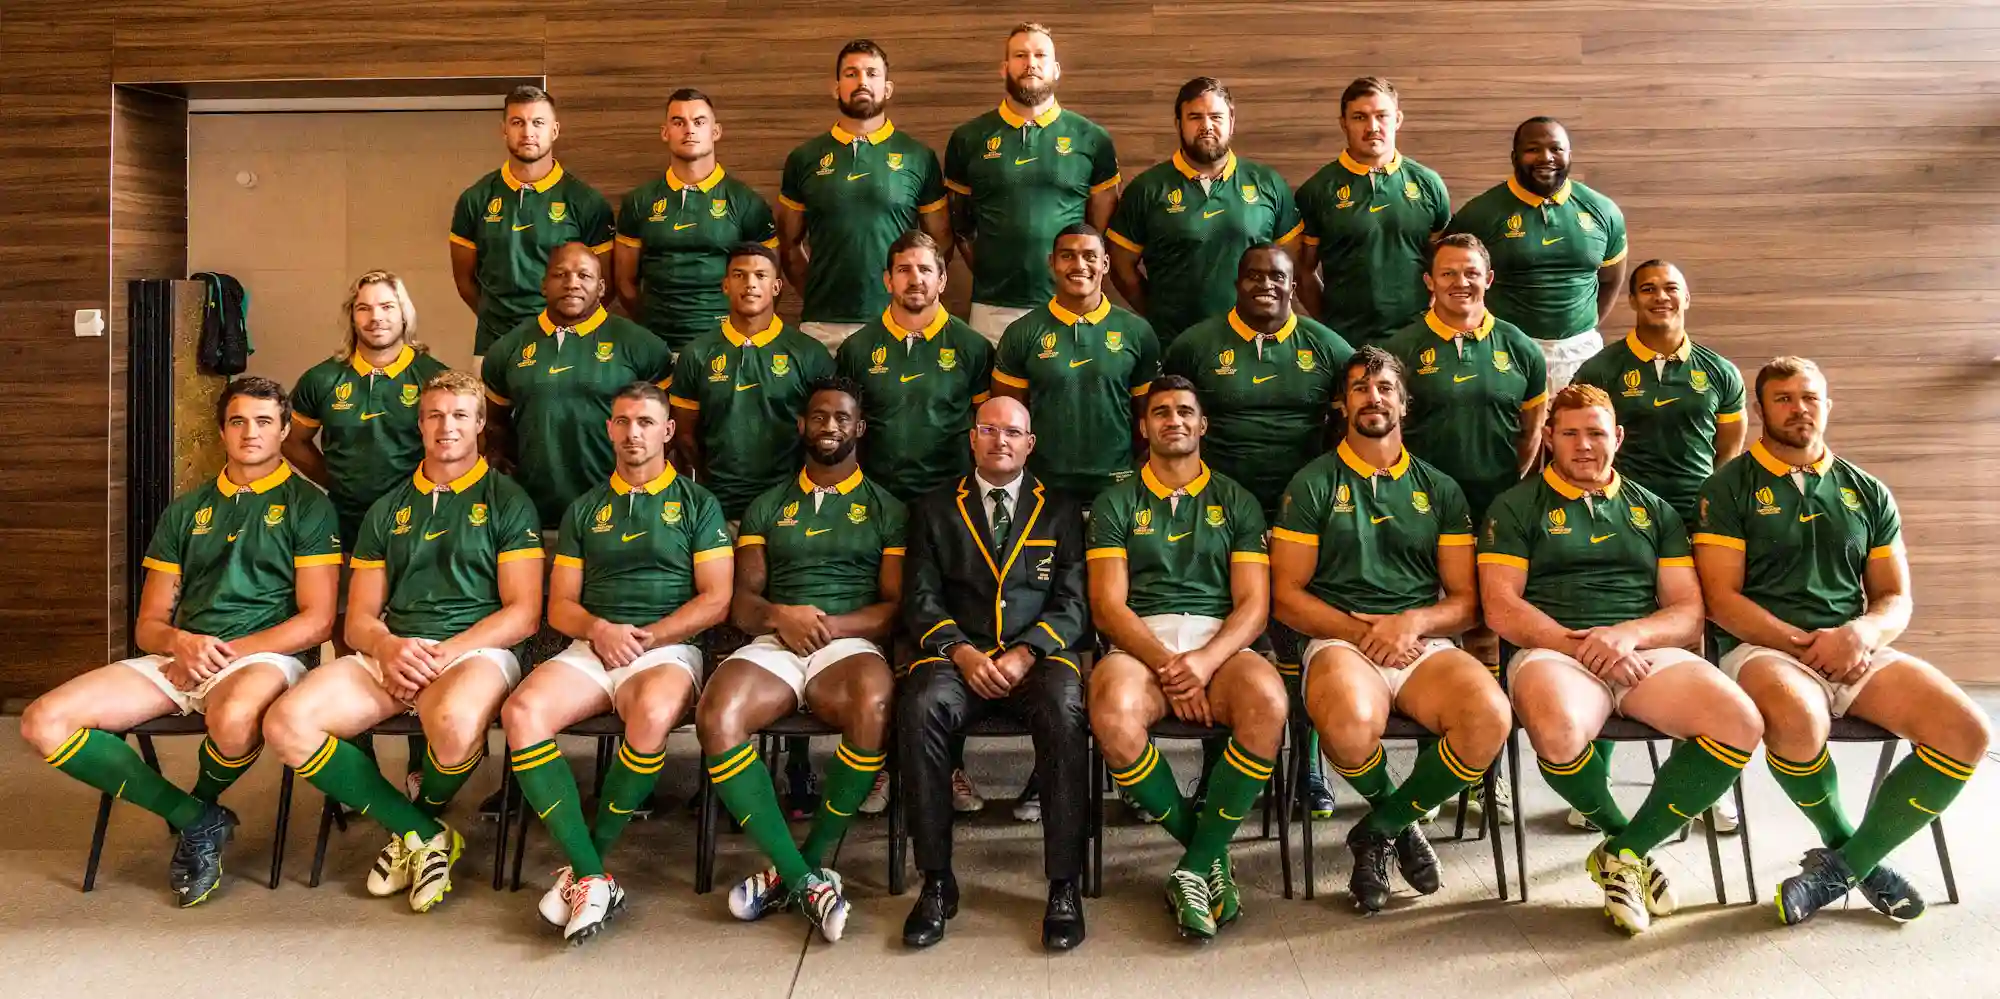 South Africa's Springboks Face New Zealand's All Blacks In The Rugby